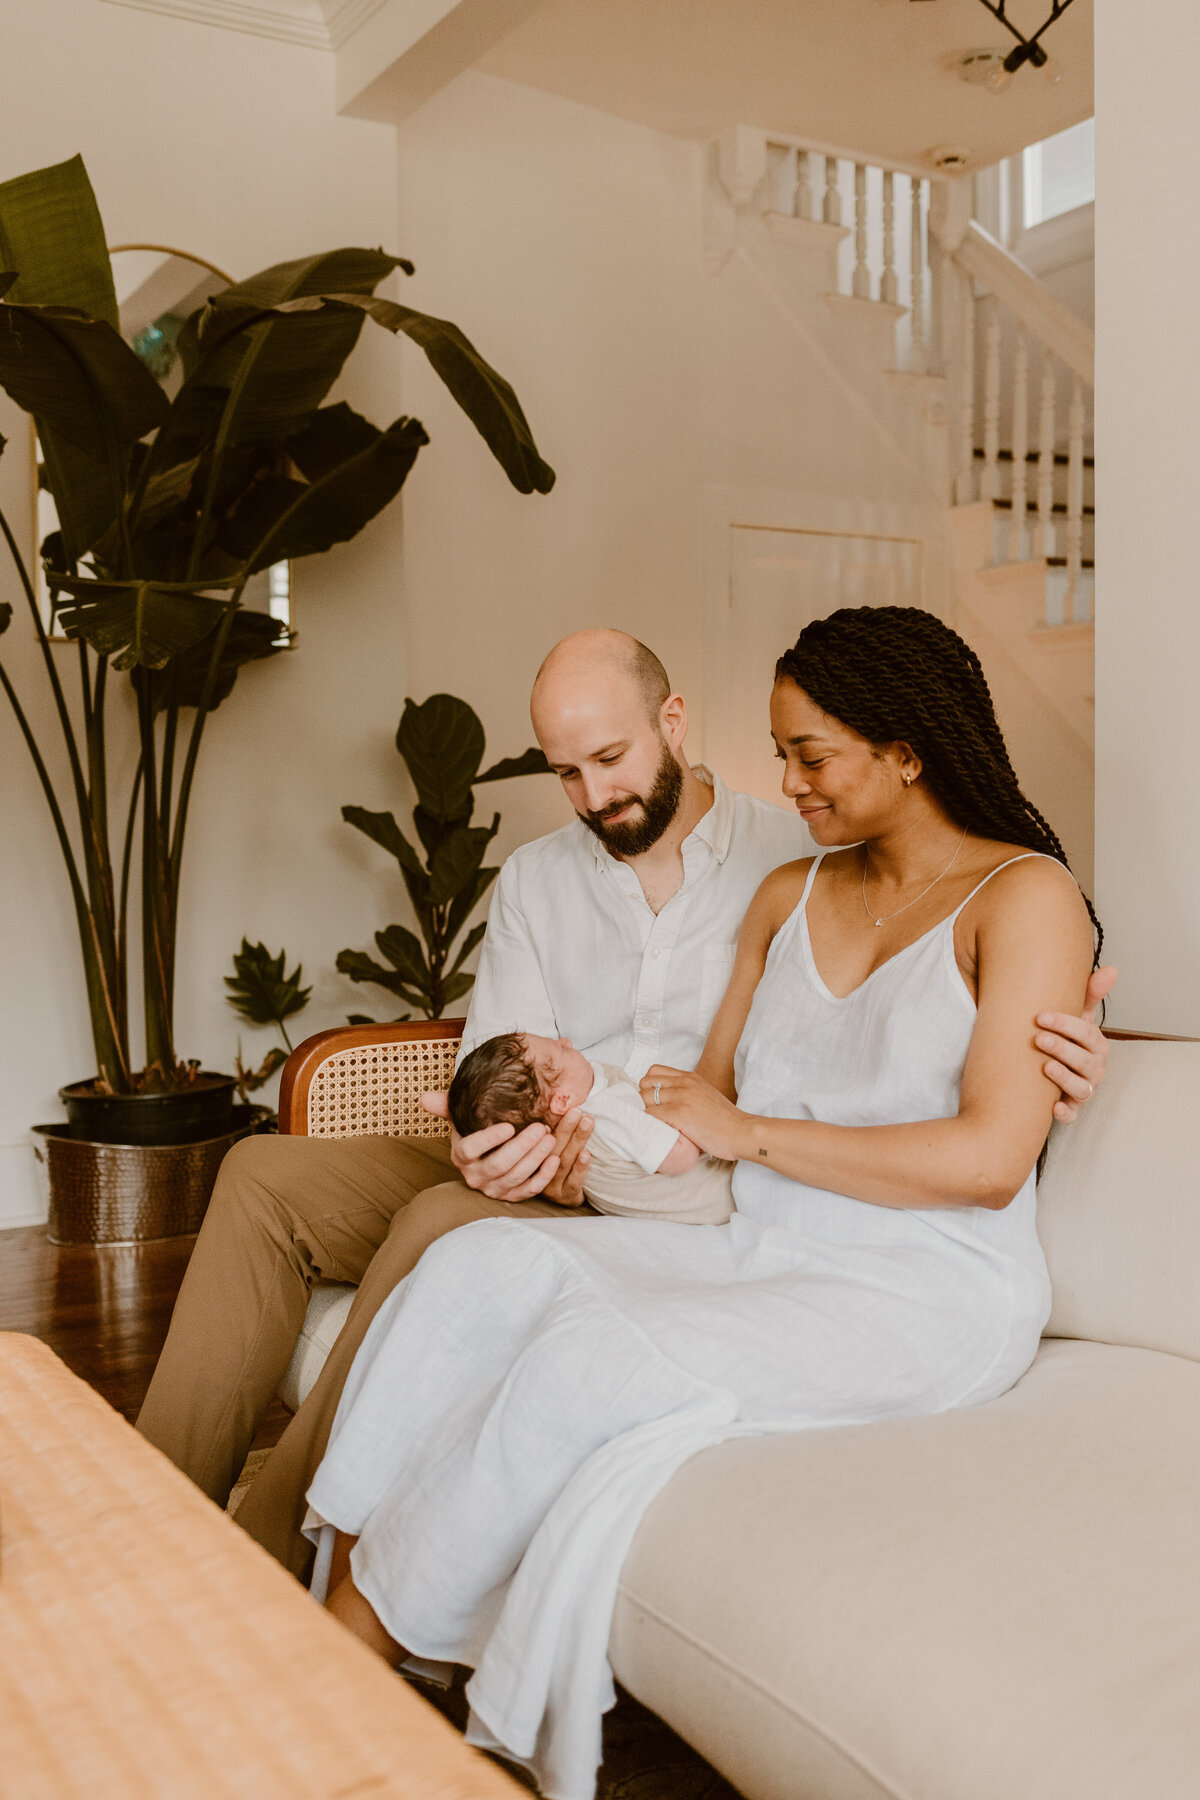 Hudson Valley Newborn Photographer captures a cozy scene of parents seated on a couch, cradling their baby.